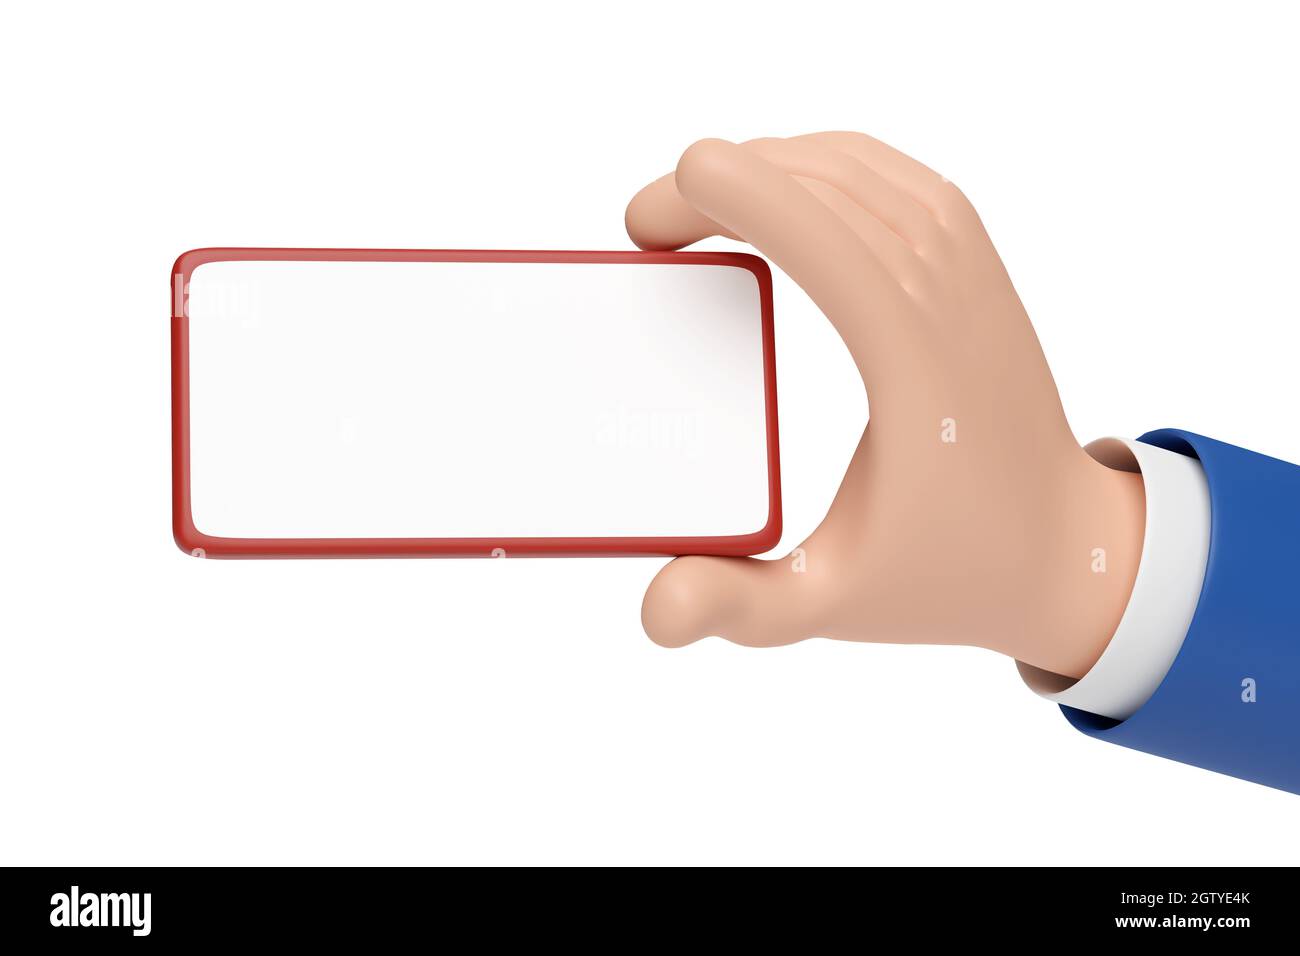 Cartoon hand holding mobile phone in horizontal position with blank screen isolated in white background. 3d illustration. Stock Photo